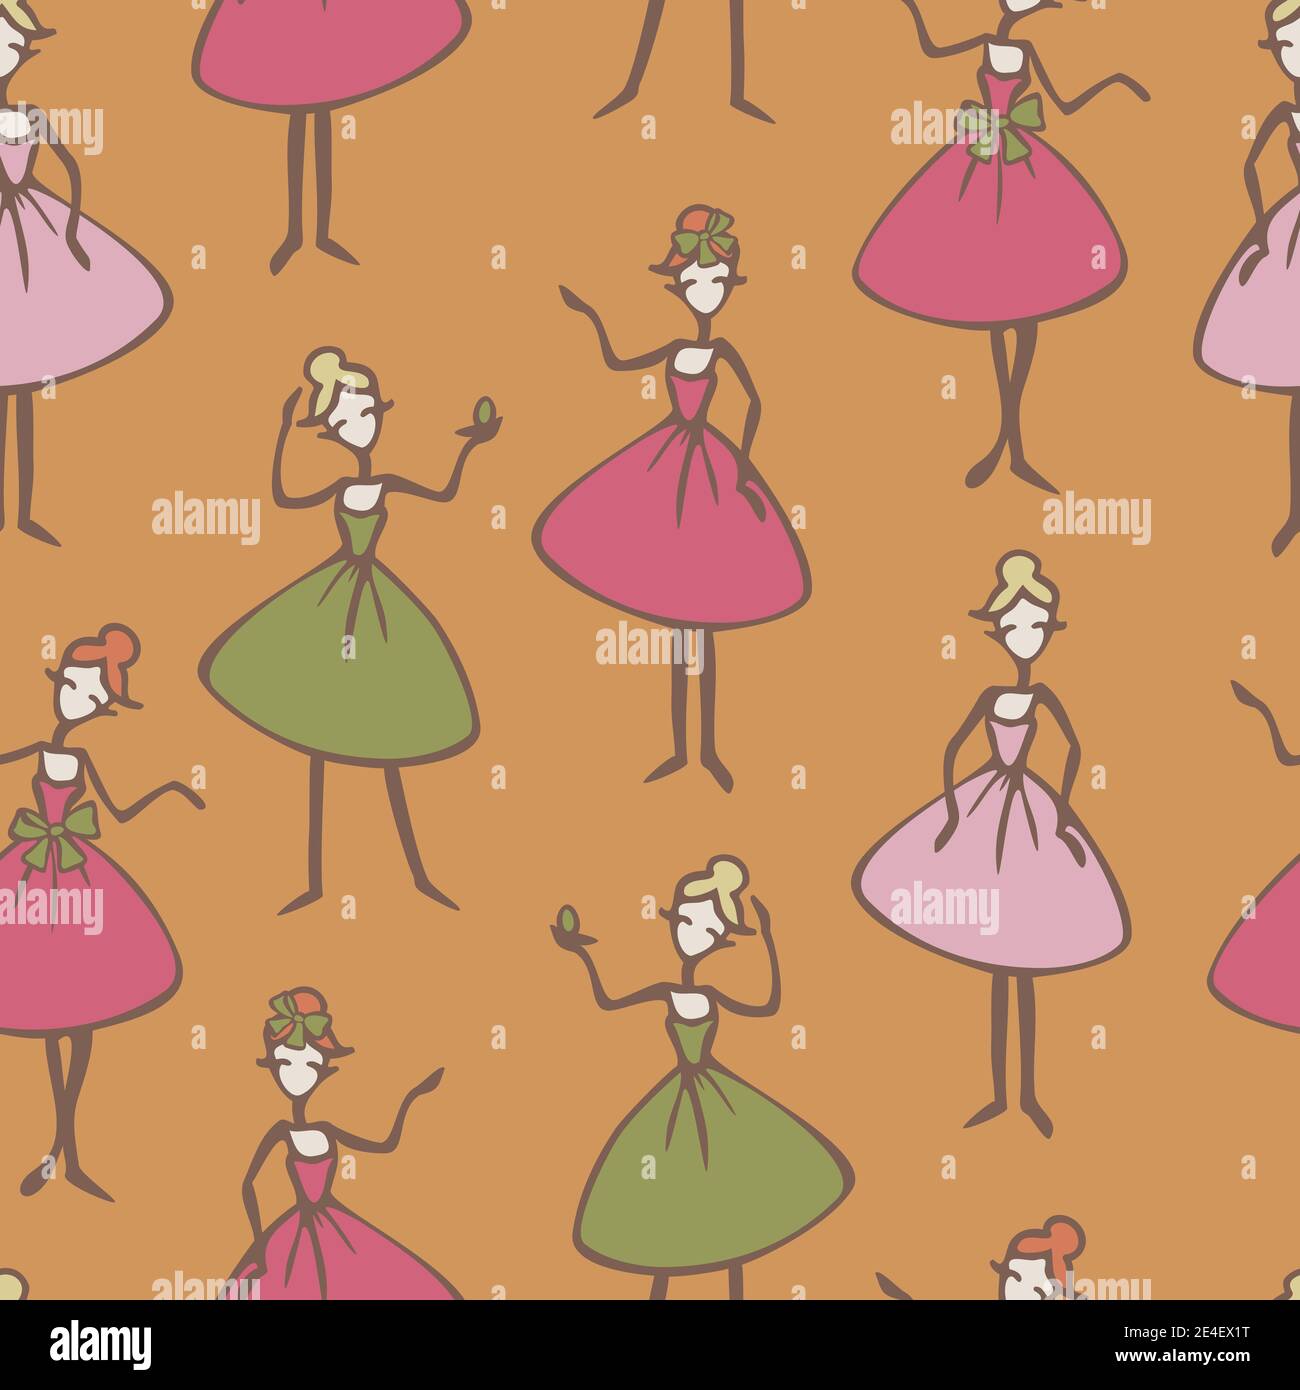 Vector seamless pattern with ladies cartoon characters. Ladies in colorful dresses in different poses. Stock Vector